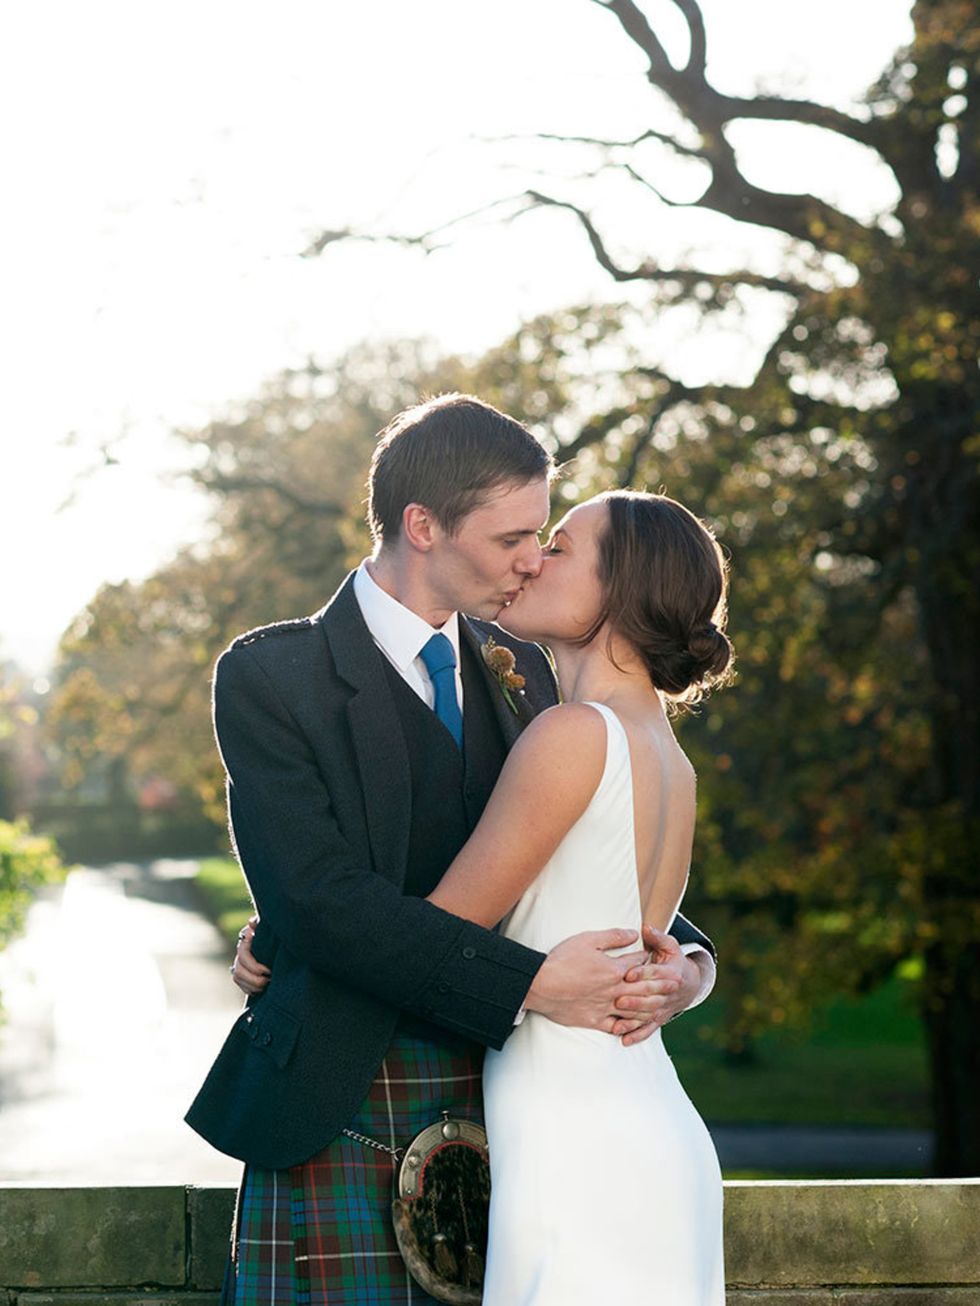 <p>We got married in the late afternoon at <a href="http://www.prestonfield.com/">Prestonfield House, Edinburgh</a> - a boutique venue perfect for small, intimate weddings.</p>